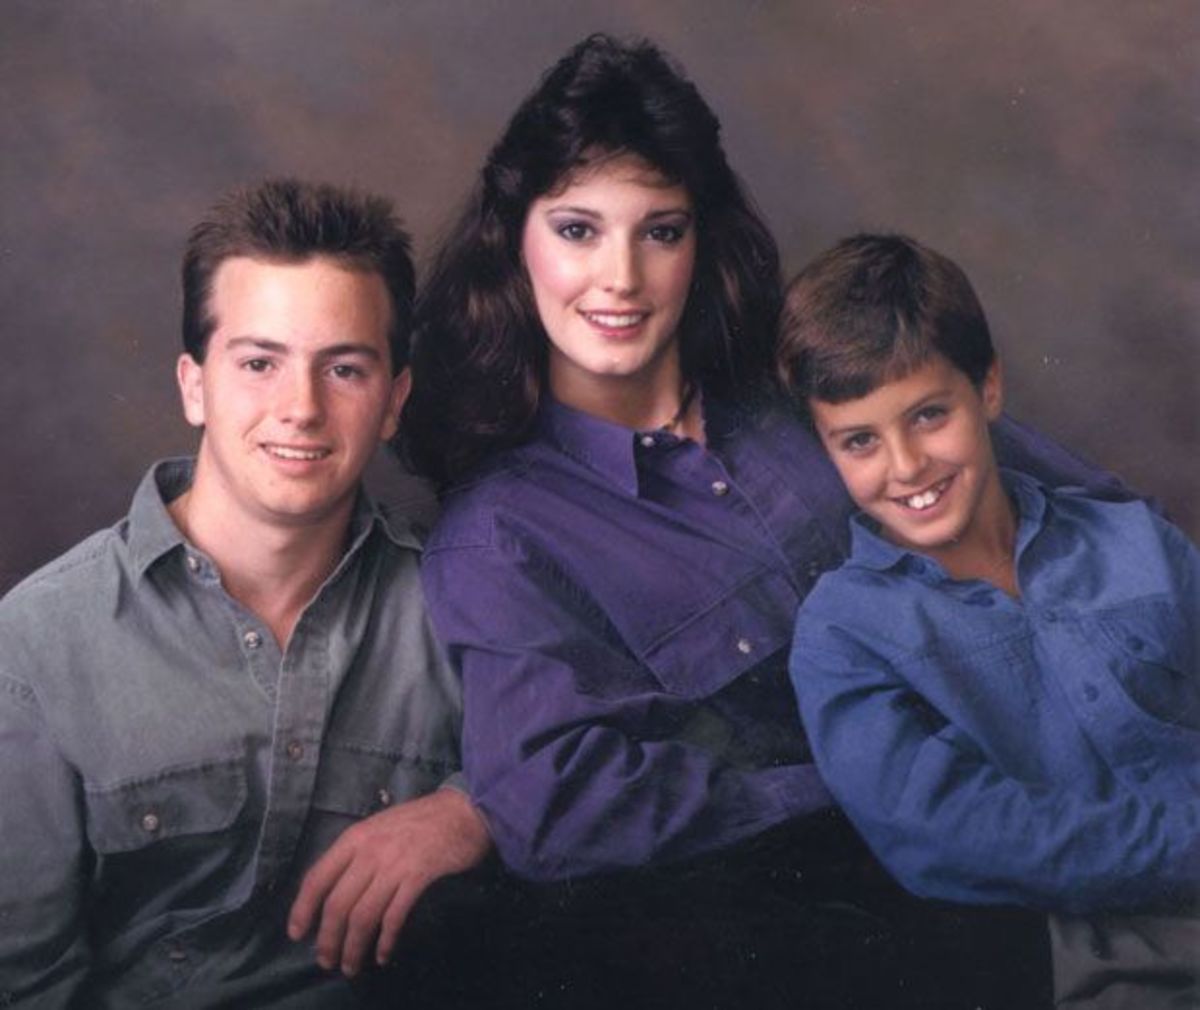 Luke Bryan (right) with siblings, Chris and Kelly